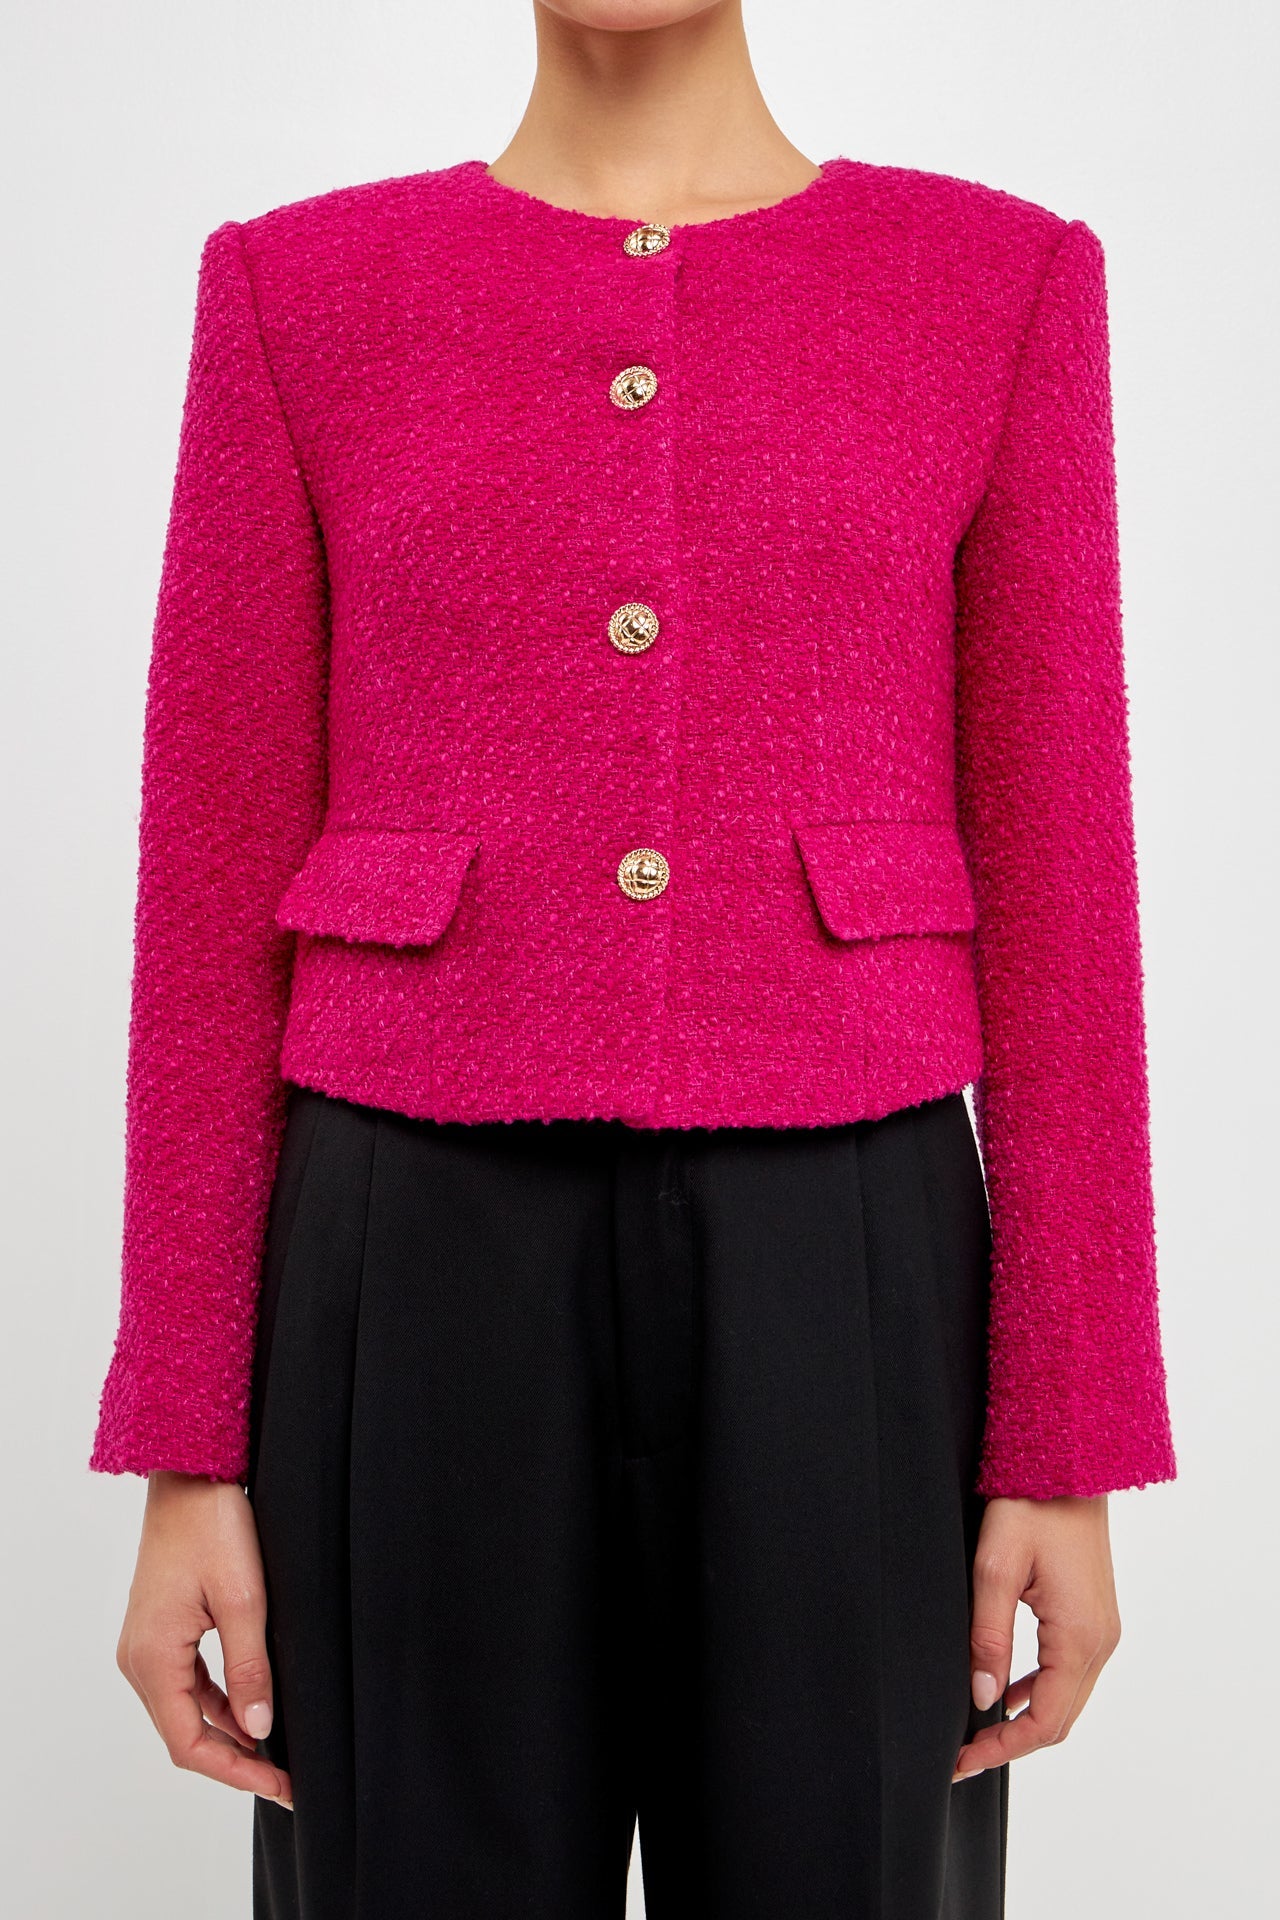 Endless Rose - Boucle Jacket - Jackets in Women's Clothing available at endlessrose.com